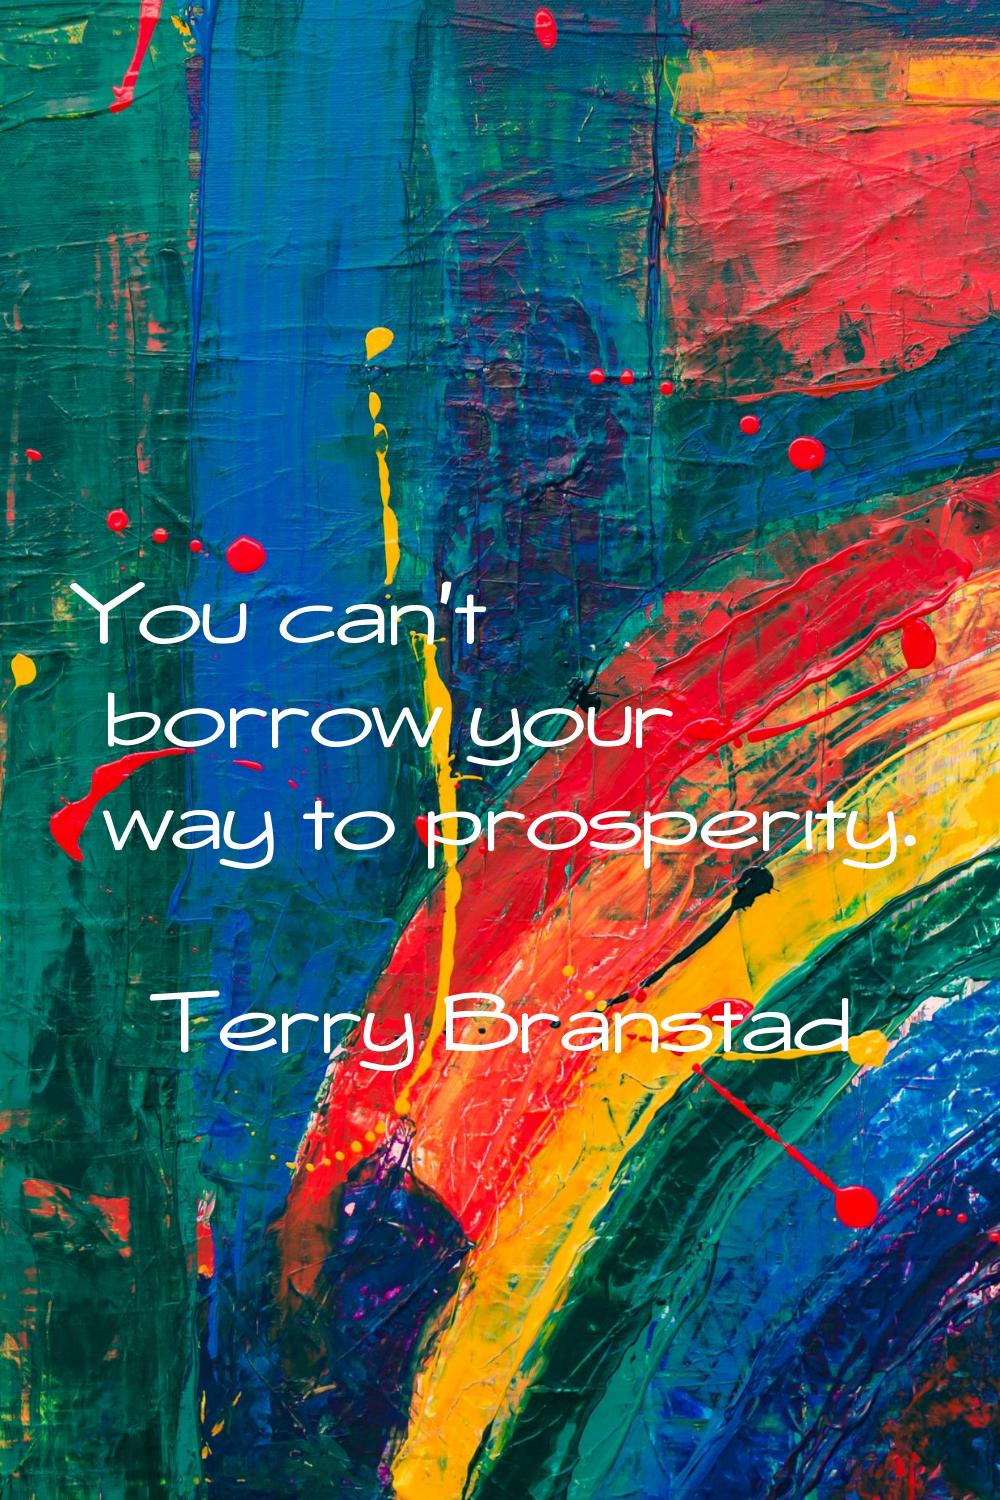 You can't borrow your way to prosperity.